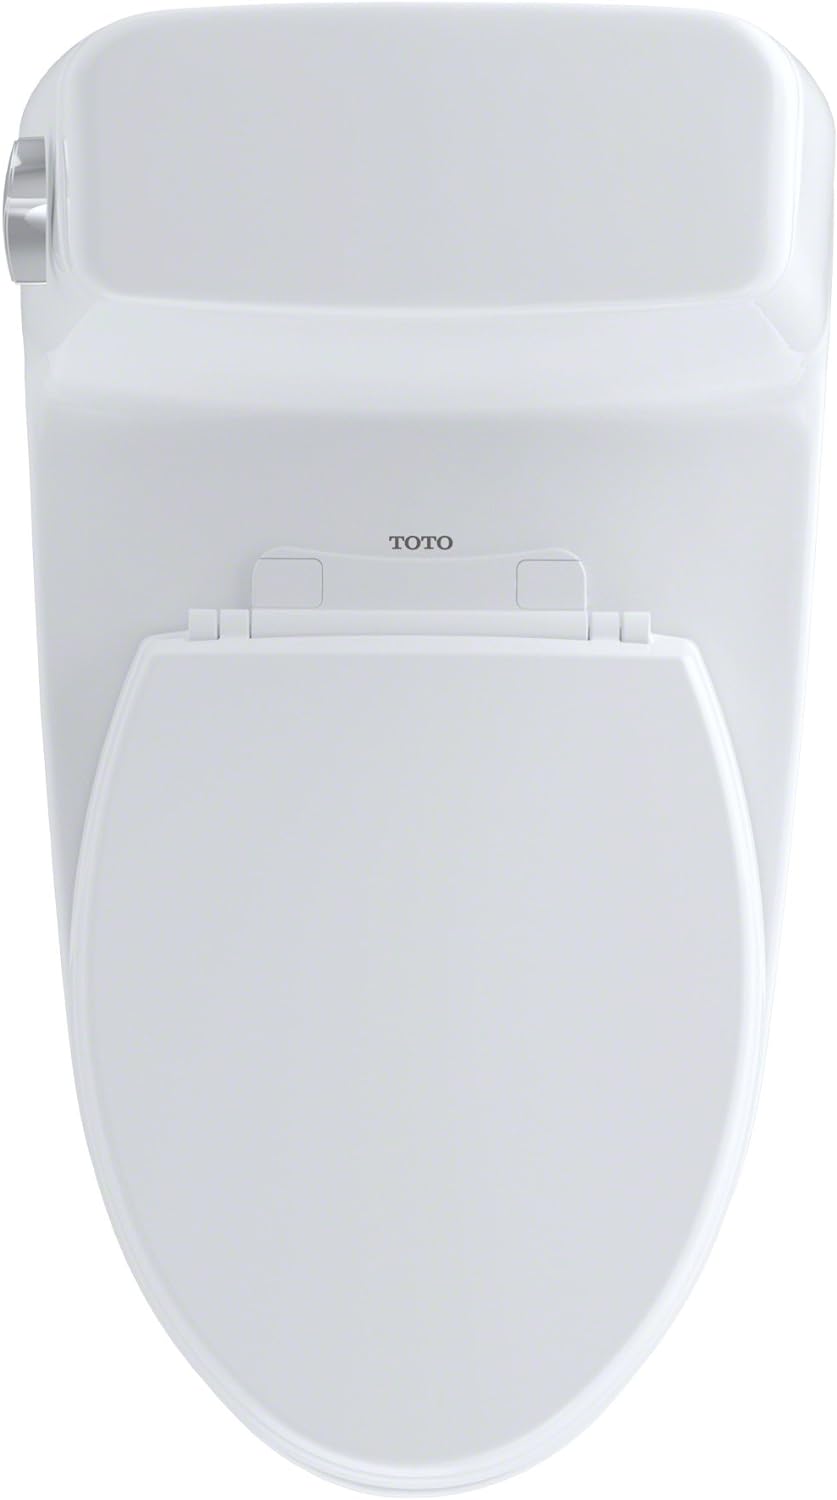 TOTO Toilet - 1.6 gpf, G-Max, Floor Mount, Elongated, Cotton White, With SoftClose Seat, Eco Ultramax, One Piece, 16-5/8"W 28-1/8" Depth